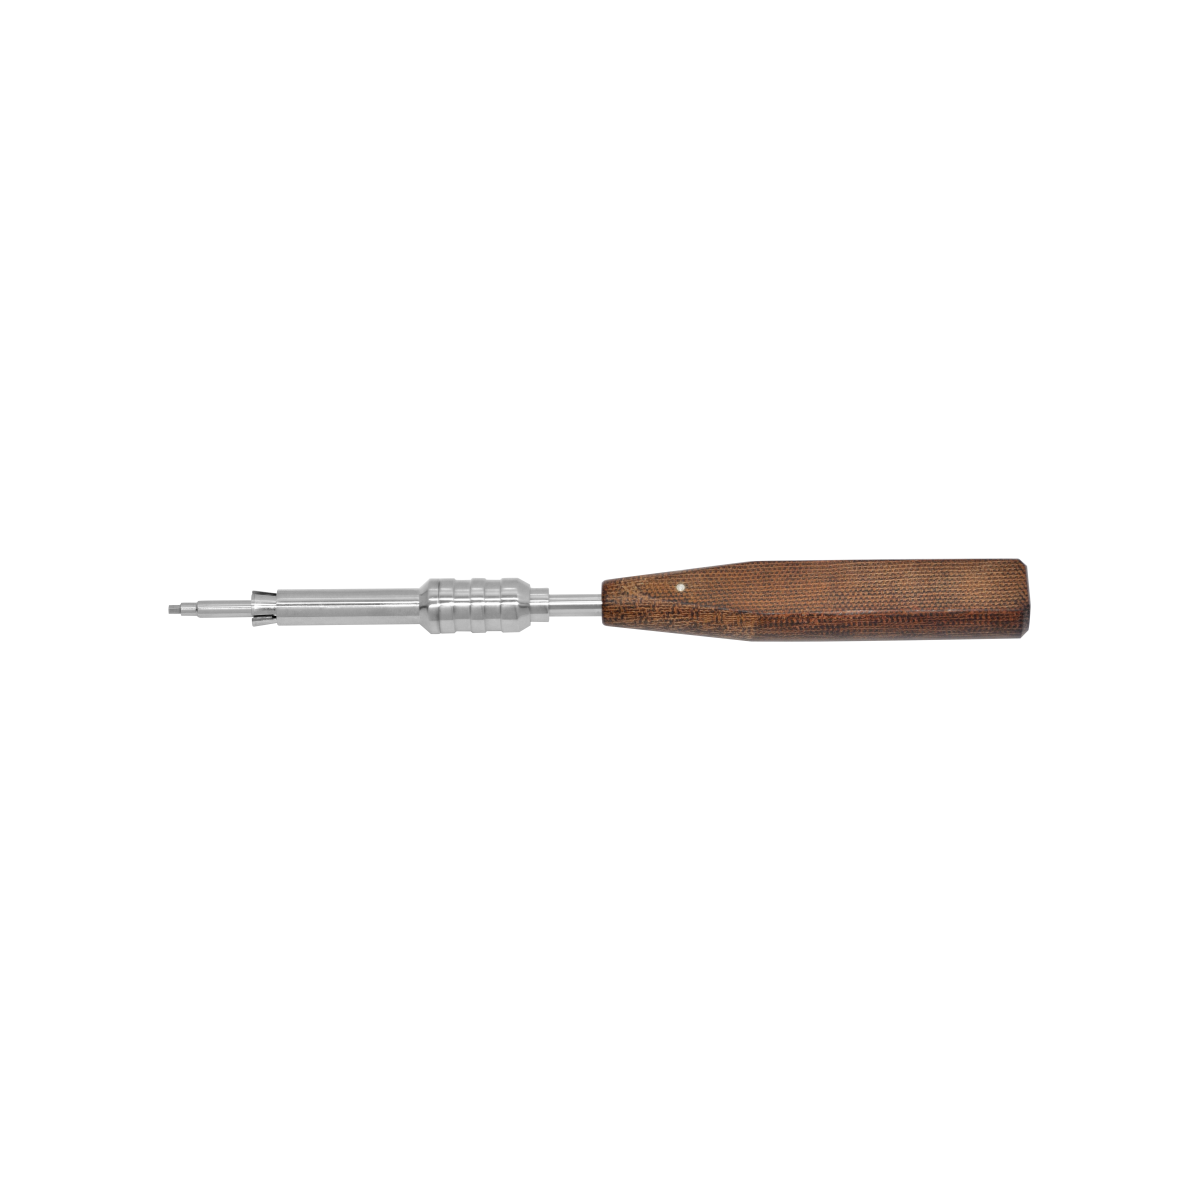 Hexagonal Screw Driver With Self Holding Sleeve 2.0mm Tip (for 2.4mm Cortical, Locking & 2.7mm Locking screws)